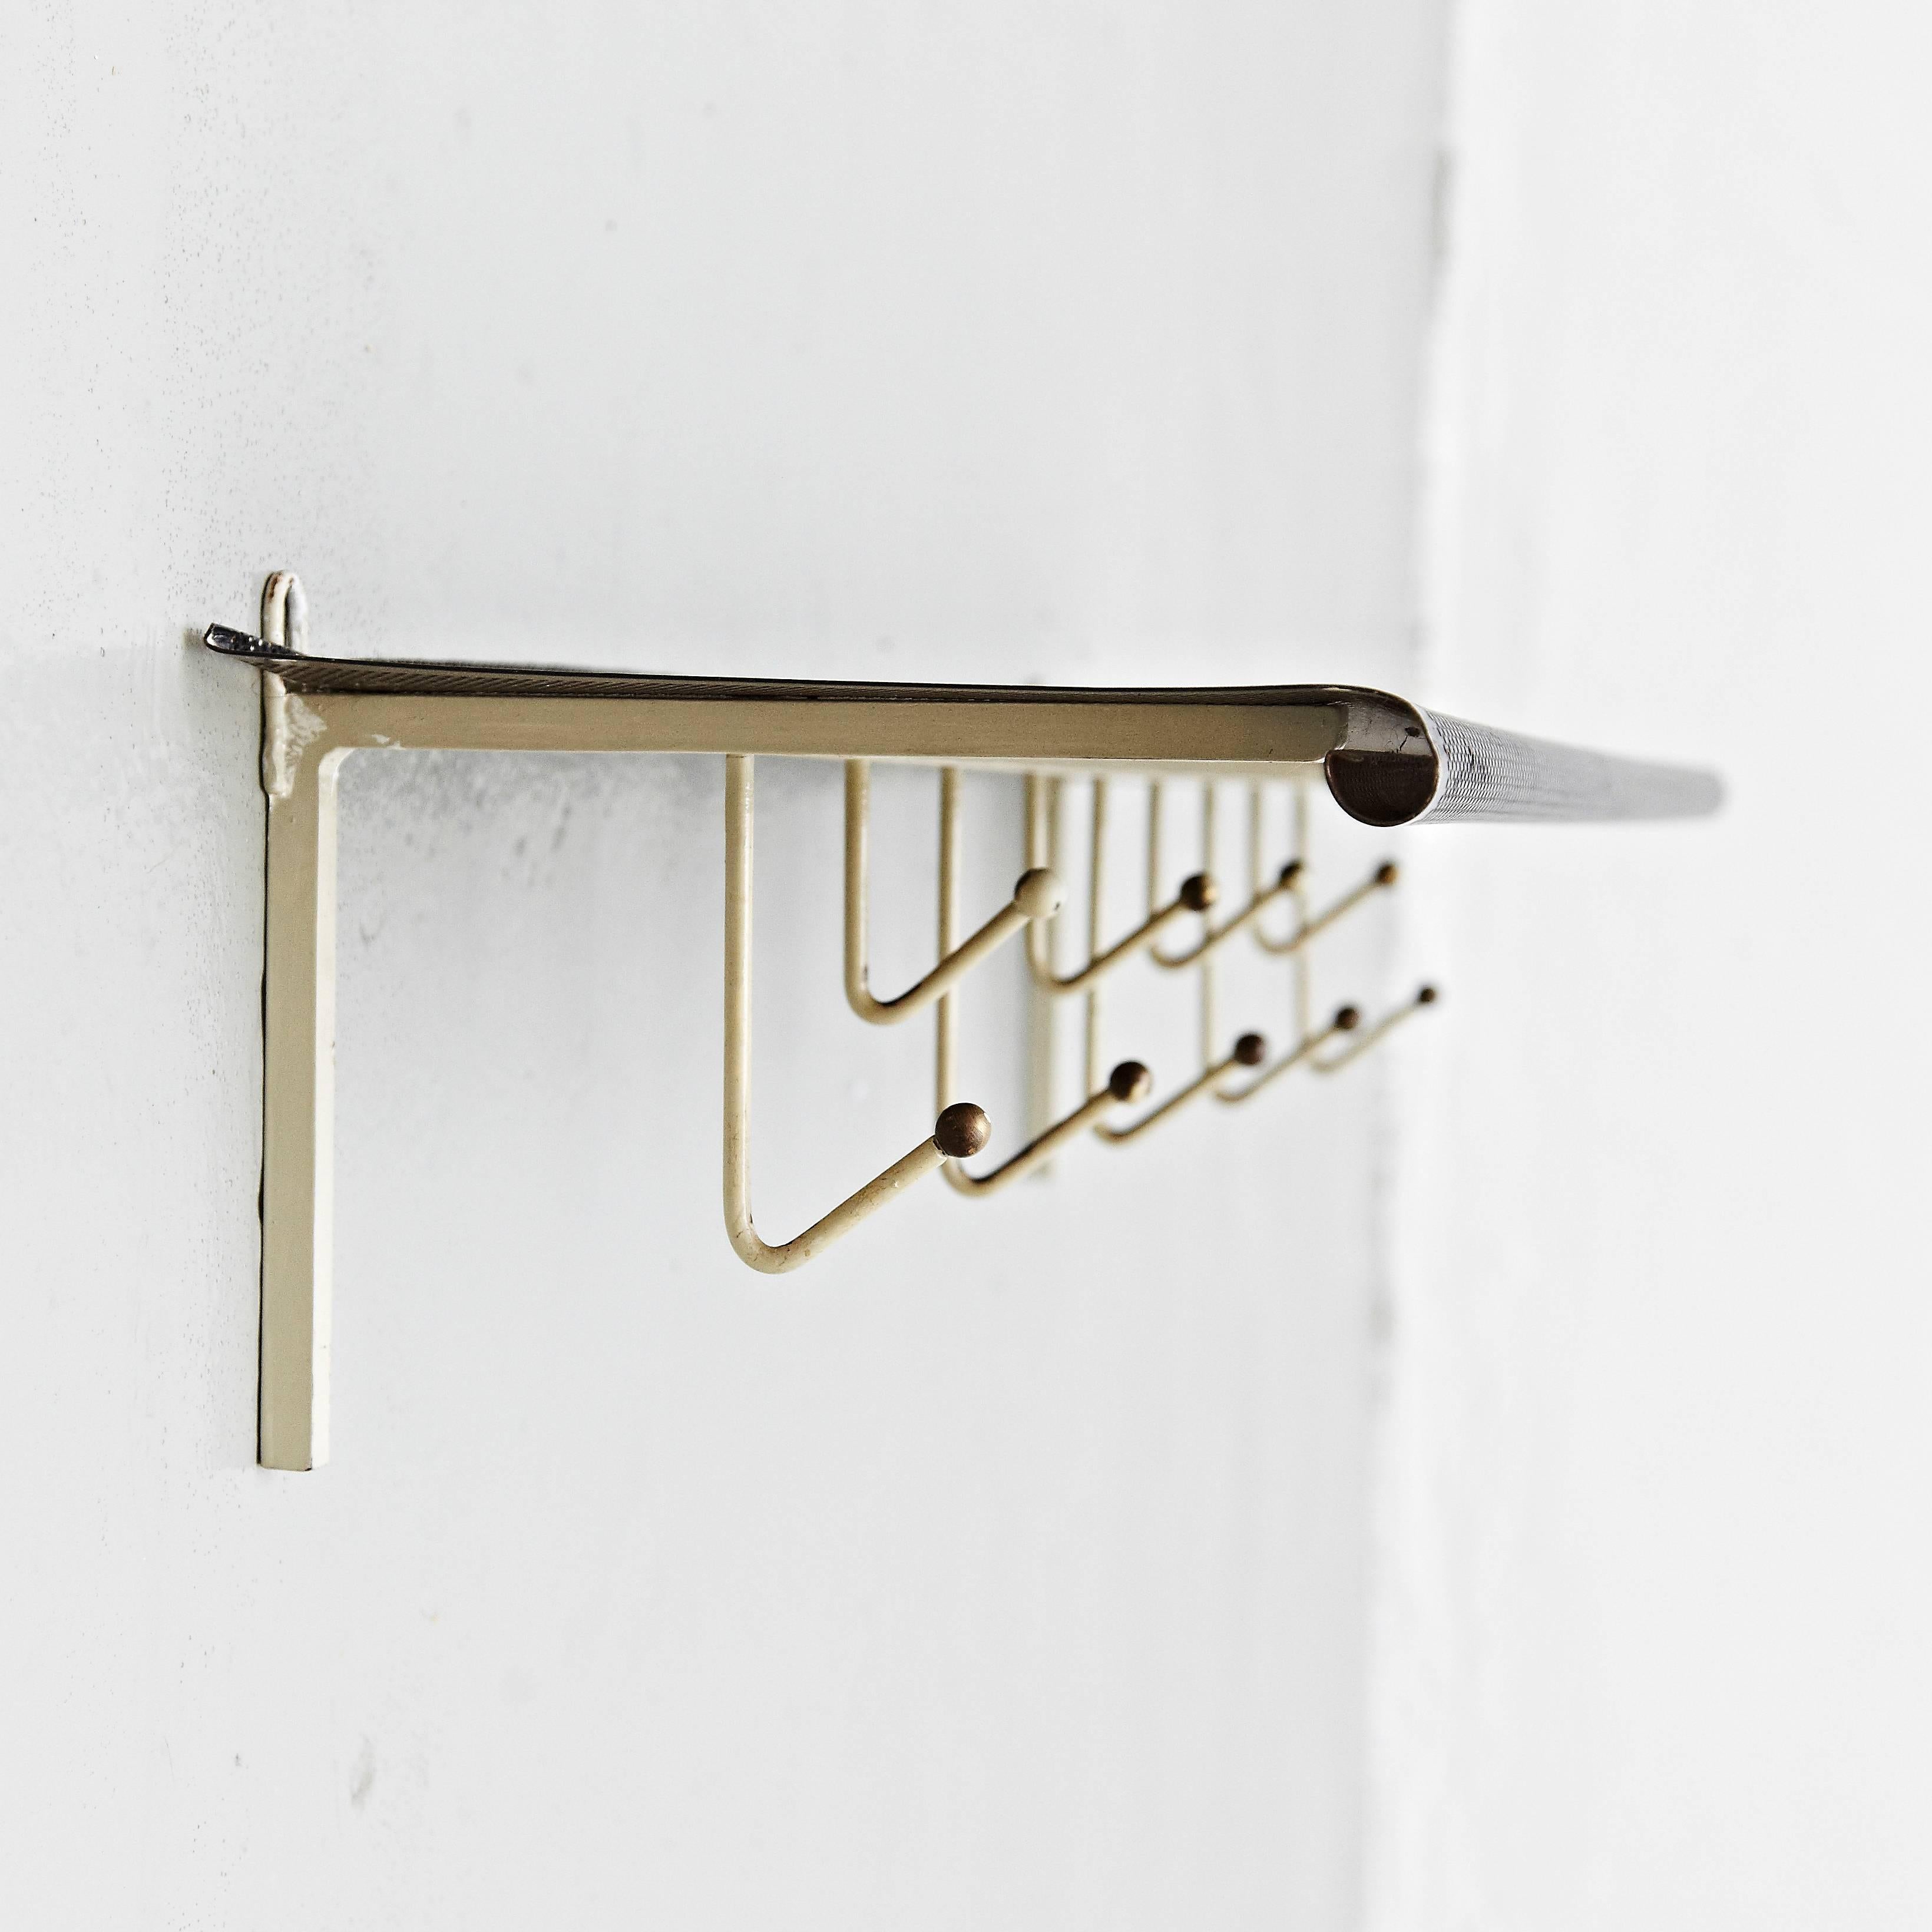 Coat rack designed by Mathieu Matégot.
Manufactured by Artimeta (Netherland), circa 1940.
Perforated, lacquered metal.

In good original condition, with minor wear consistent with age and use, preserving a beautiful patina.

Mathieu Matégot